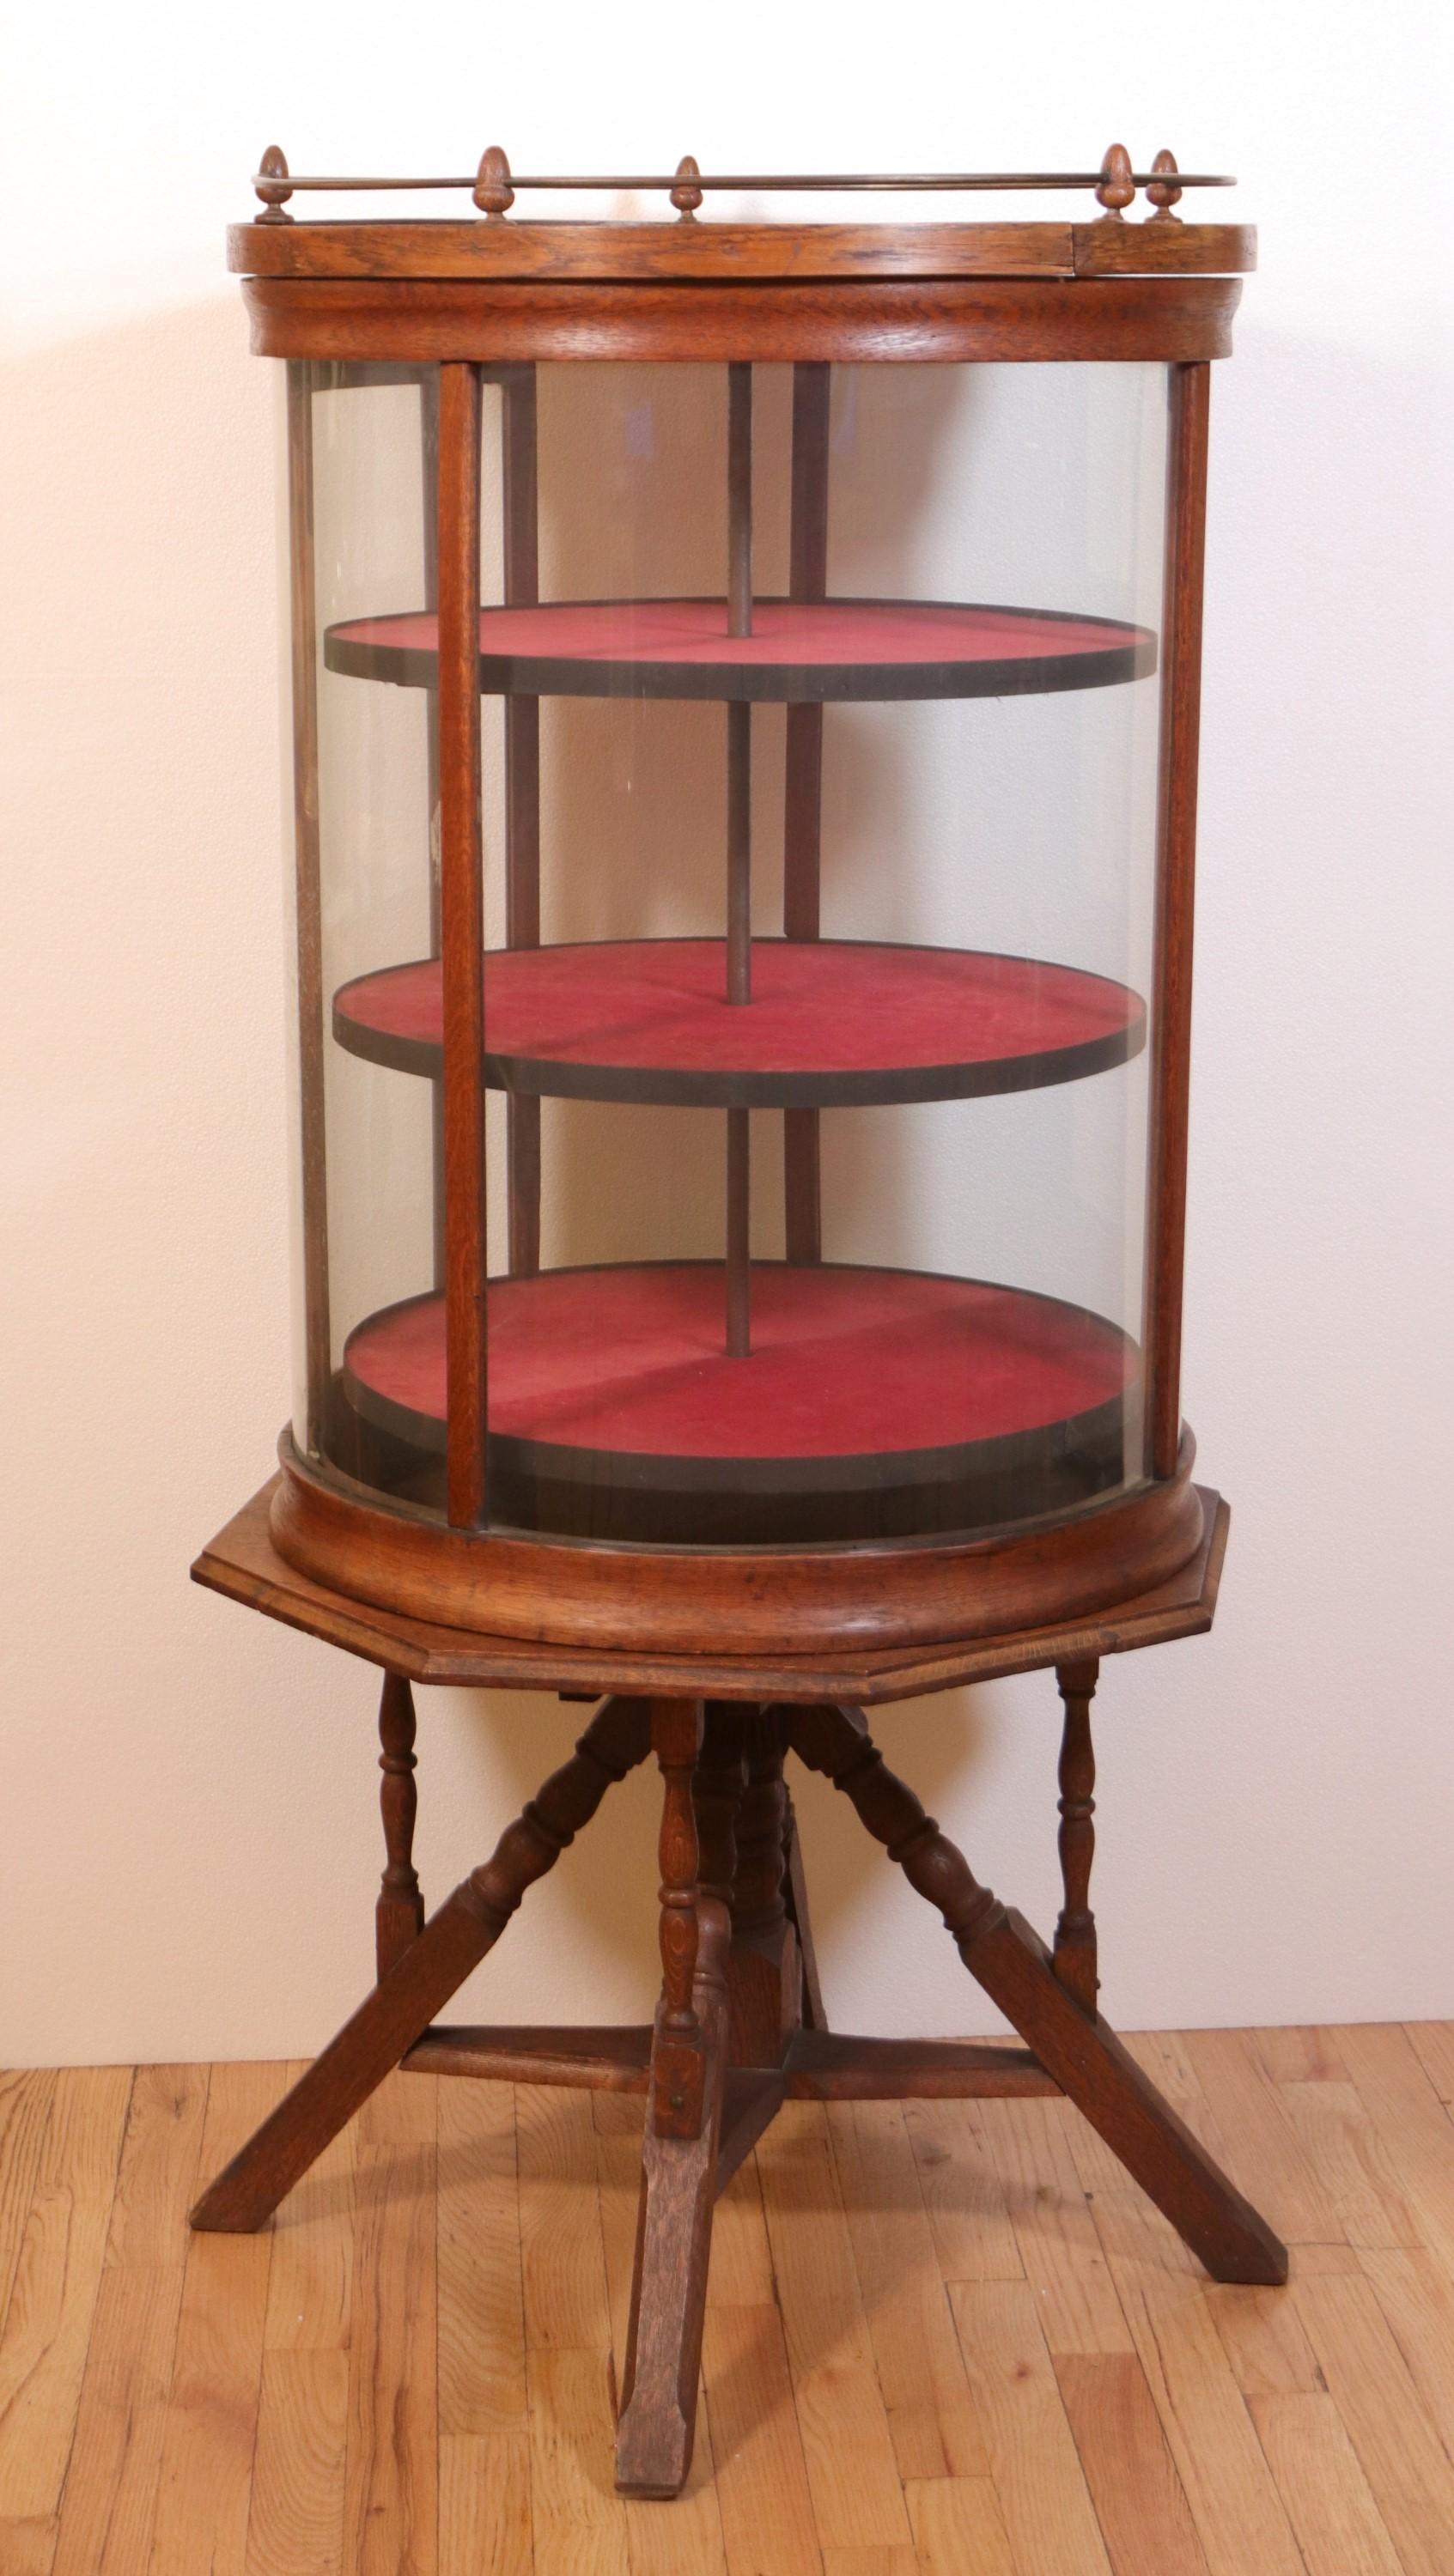 This antique oak revolving display case features three shelves lined with red felt. It has a handsome oak base with spindle type legs. Not only does it have a unique style, but also operates smoothly and has minimal surface wear due to age.